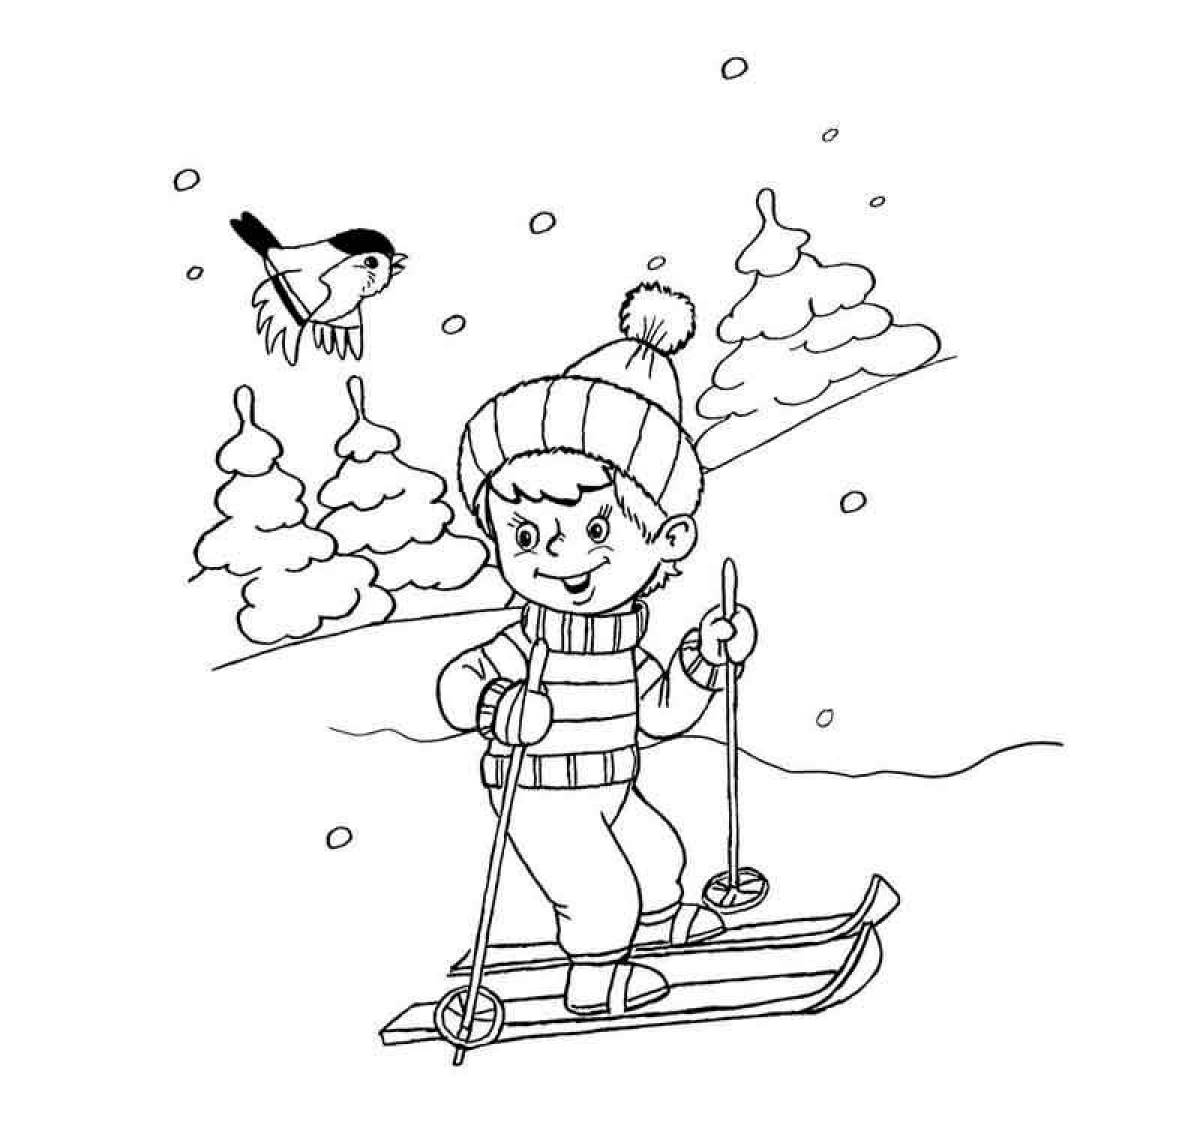 Wonderful coloring book for children 3-4 years old winter sports